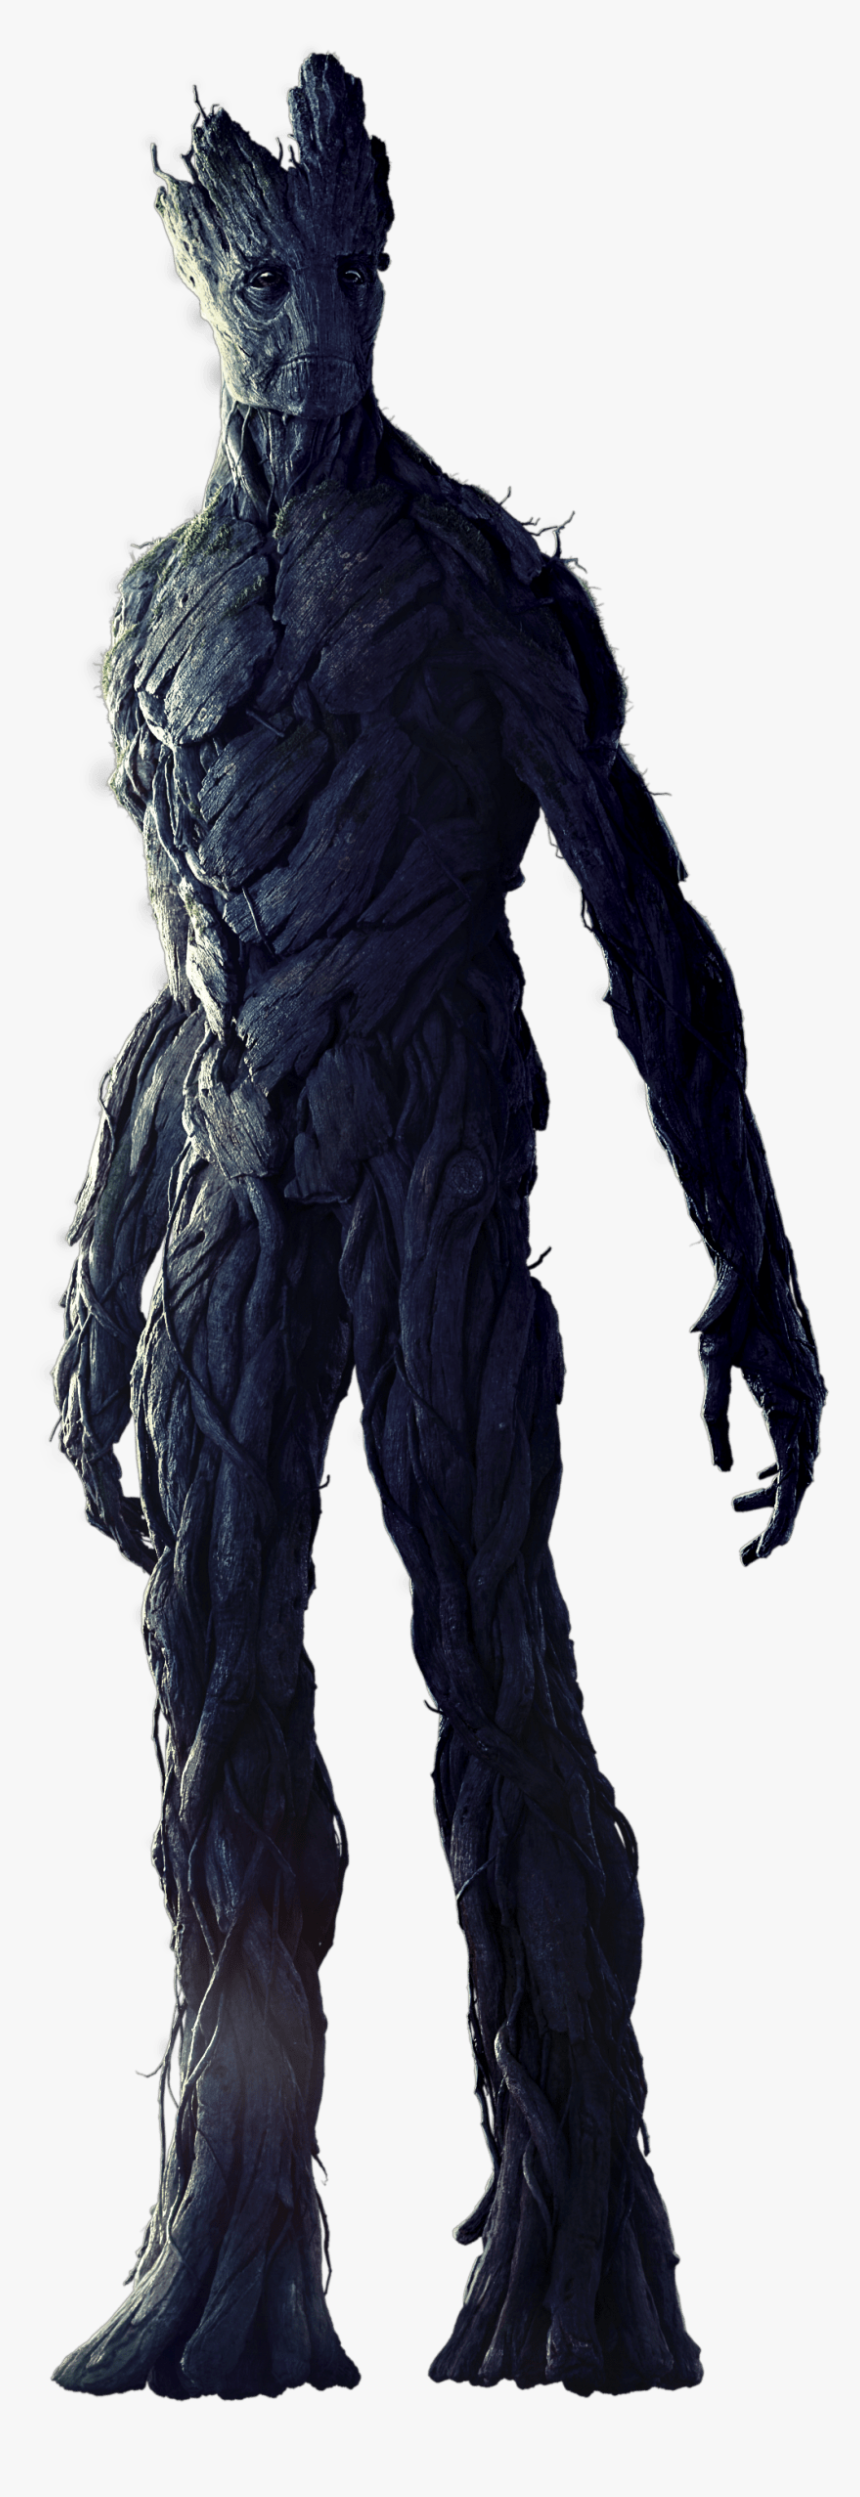 Guardians Of The Galaxy Groot - Guardians Of The Galaxy Groot Png, Transparent Png, Free Download